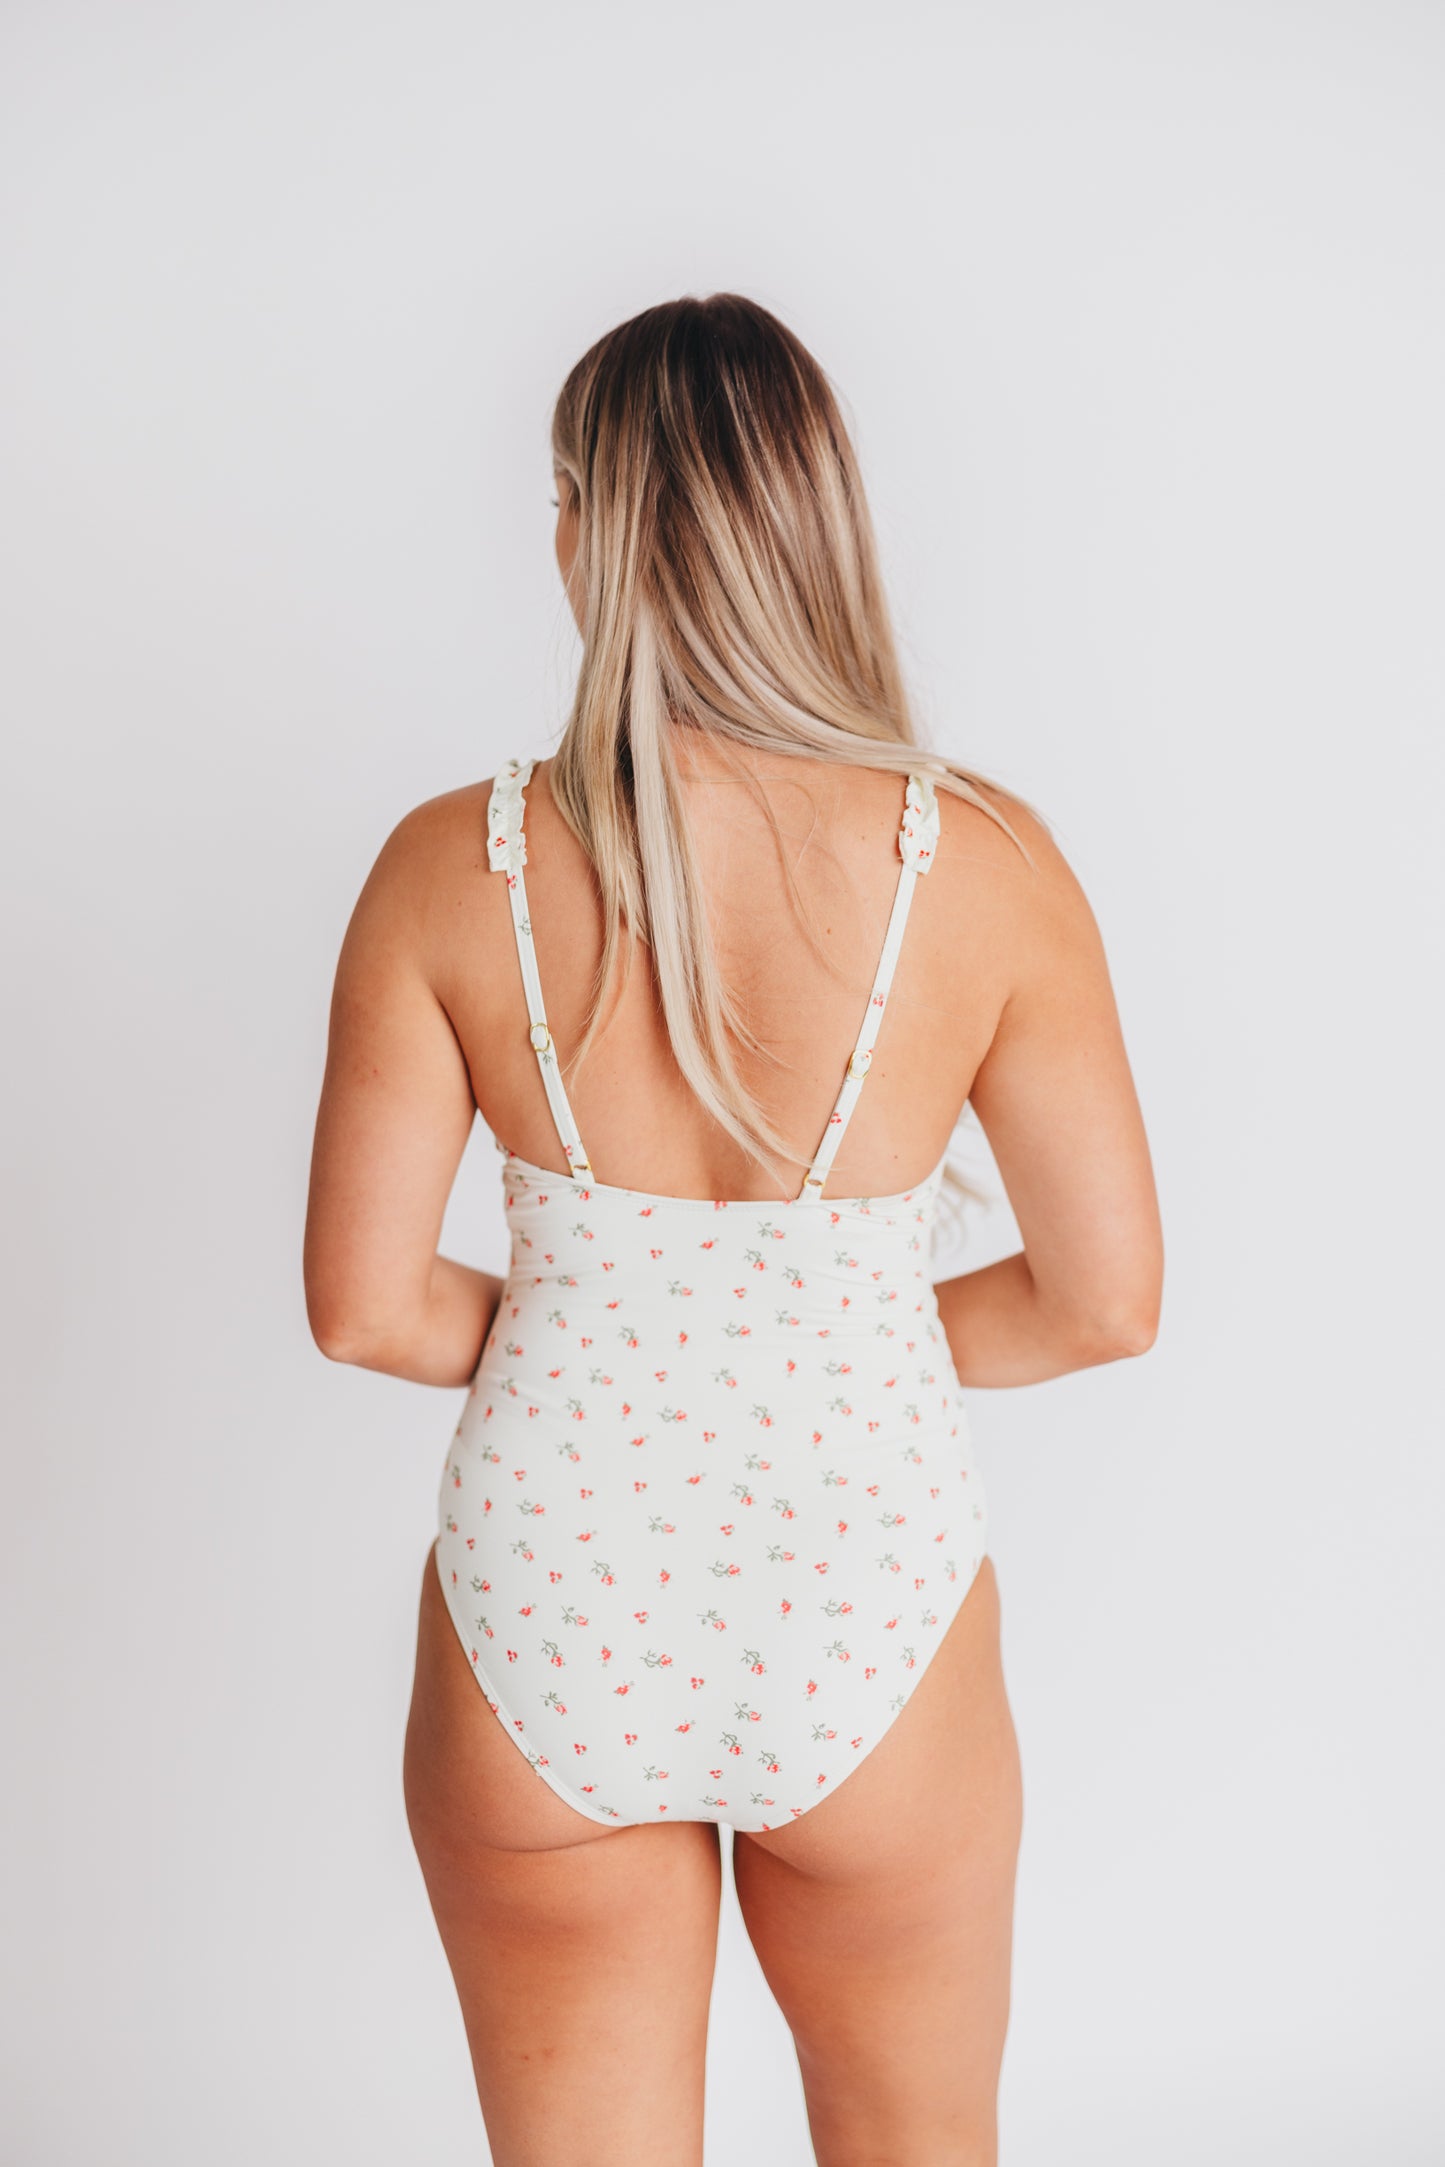 Carly Underwire One Piece Swimsuit in White with Red Floral